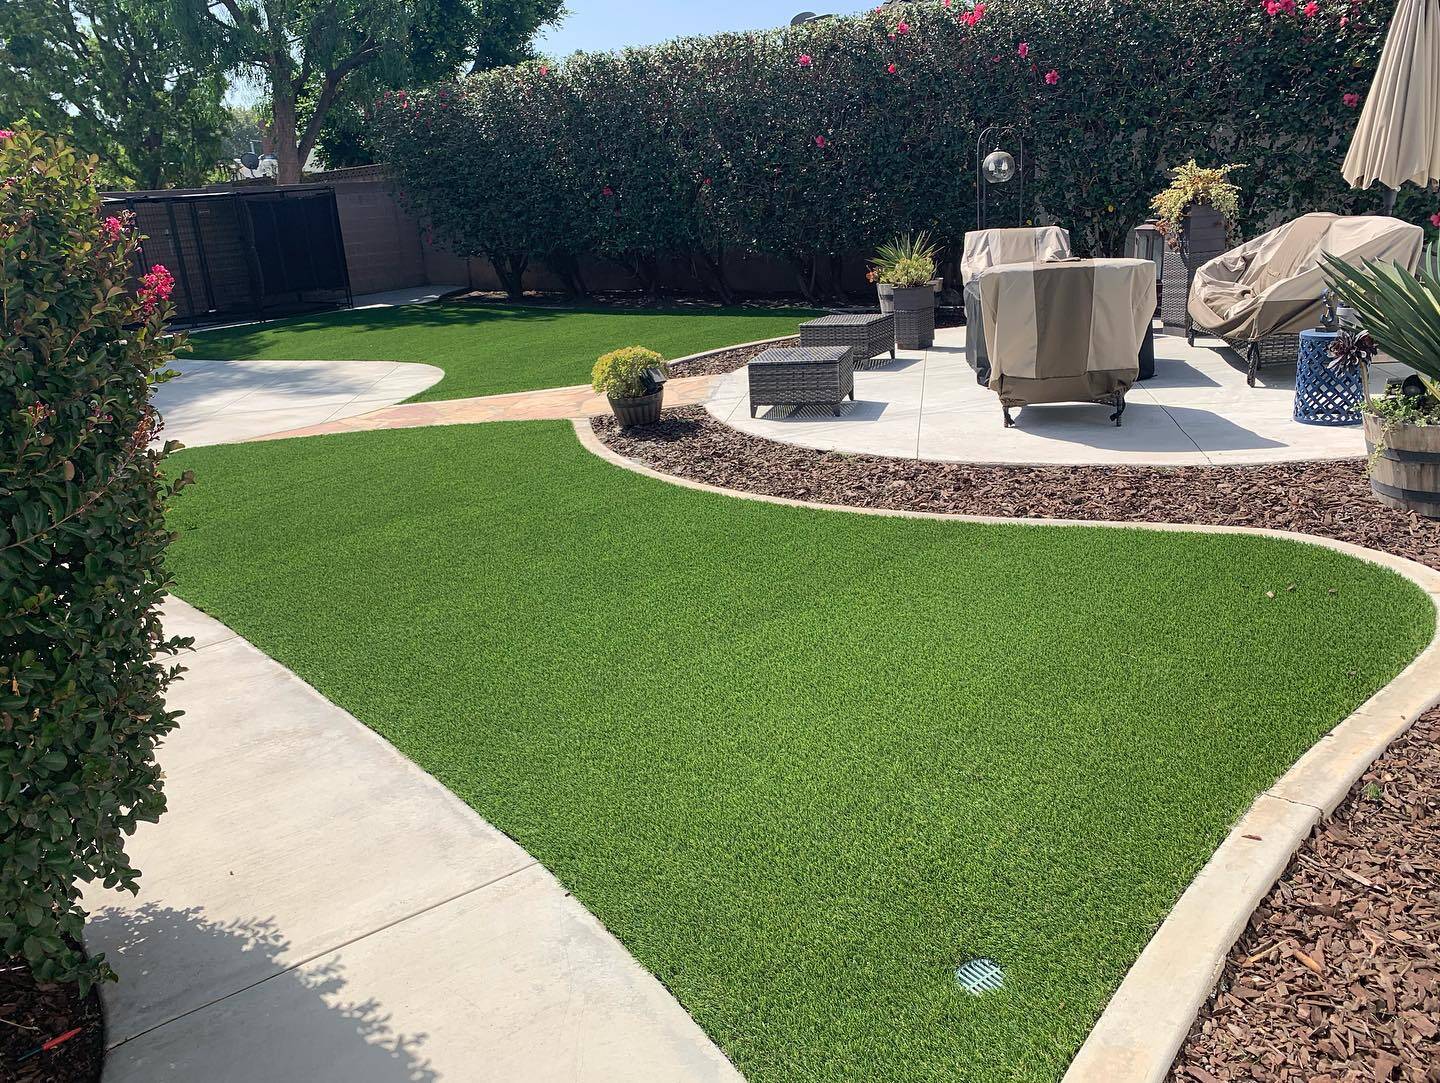 Placentia Artificial Grass & Pavers Services, Green-R Turf